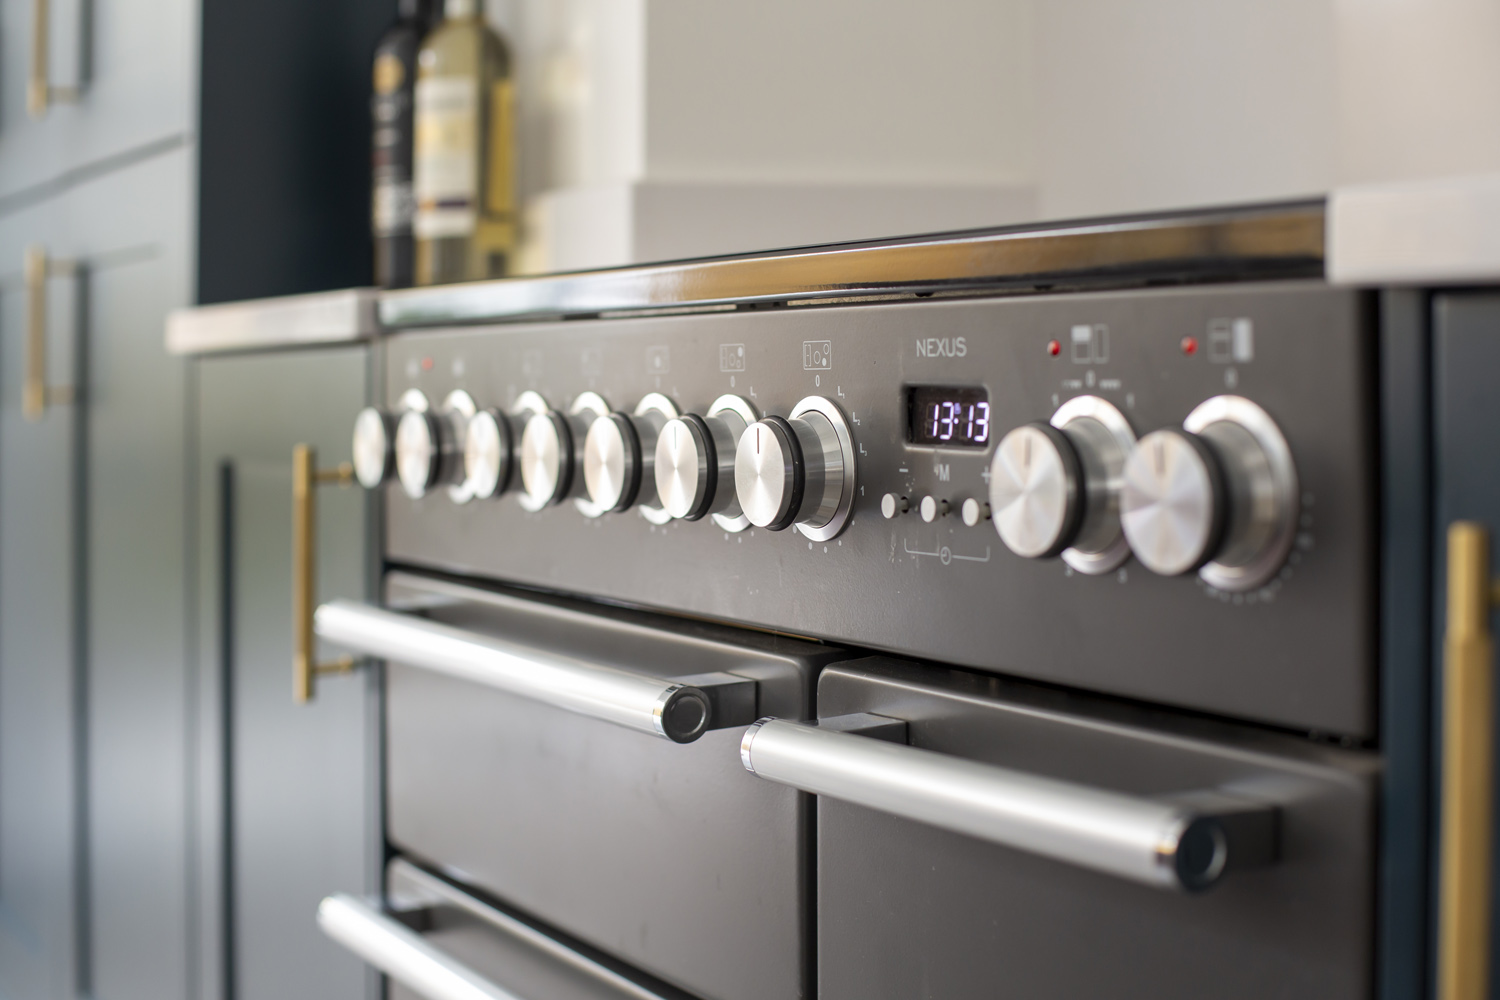 A close up of range cooker buttons